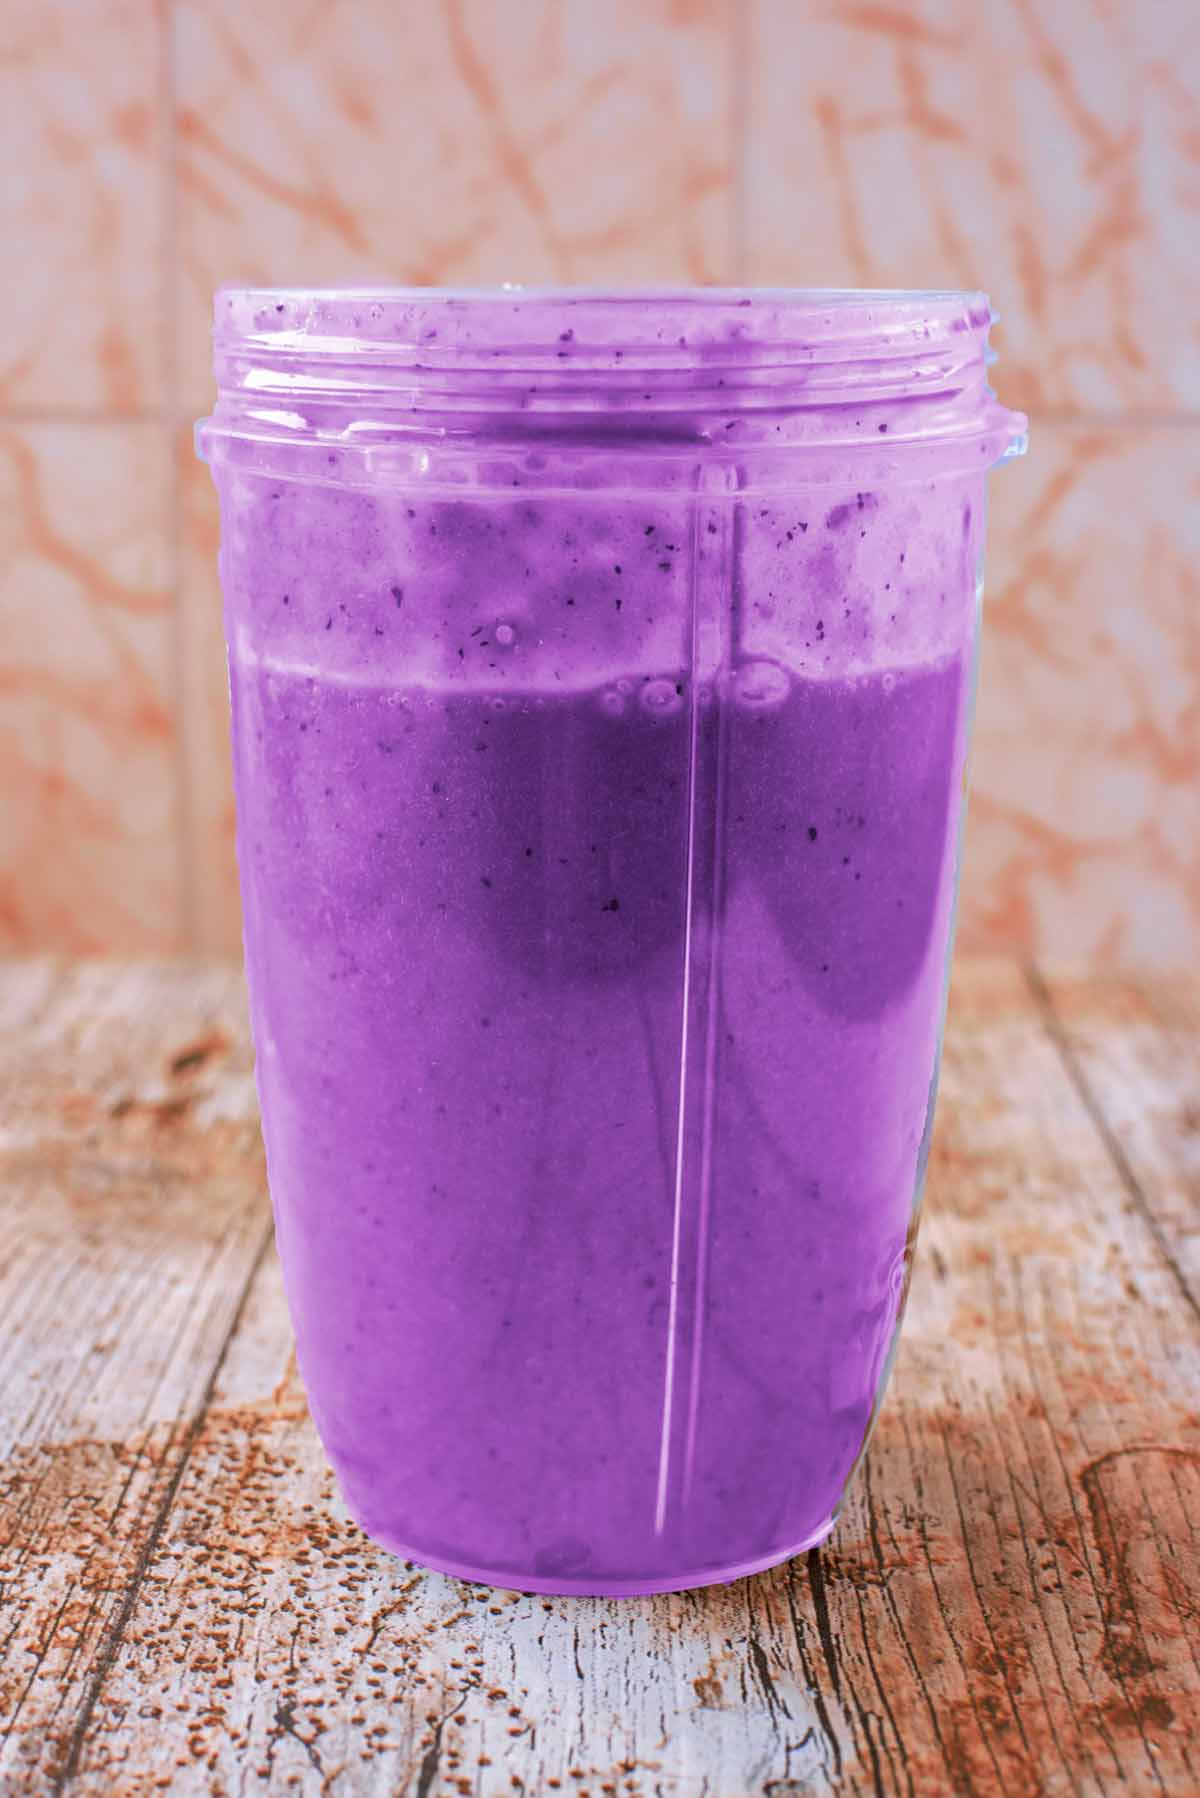 A blended purple smoothie.